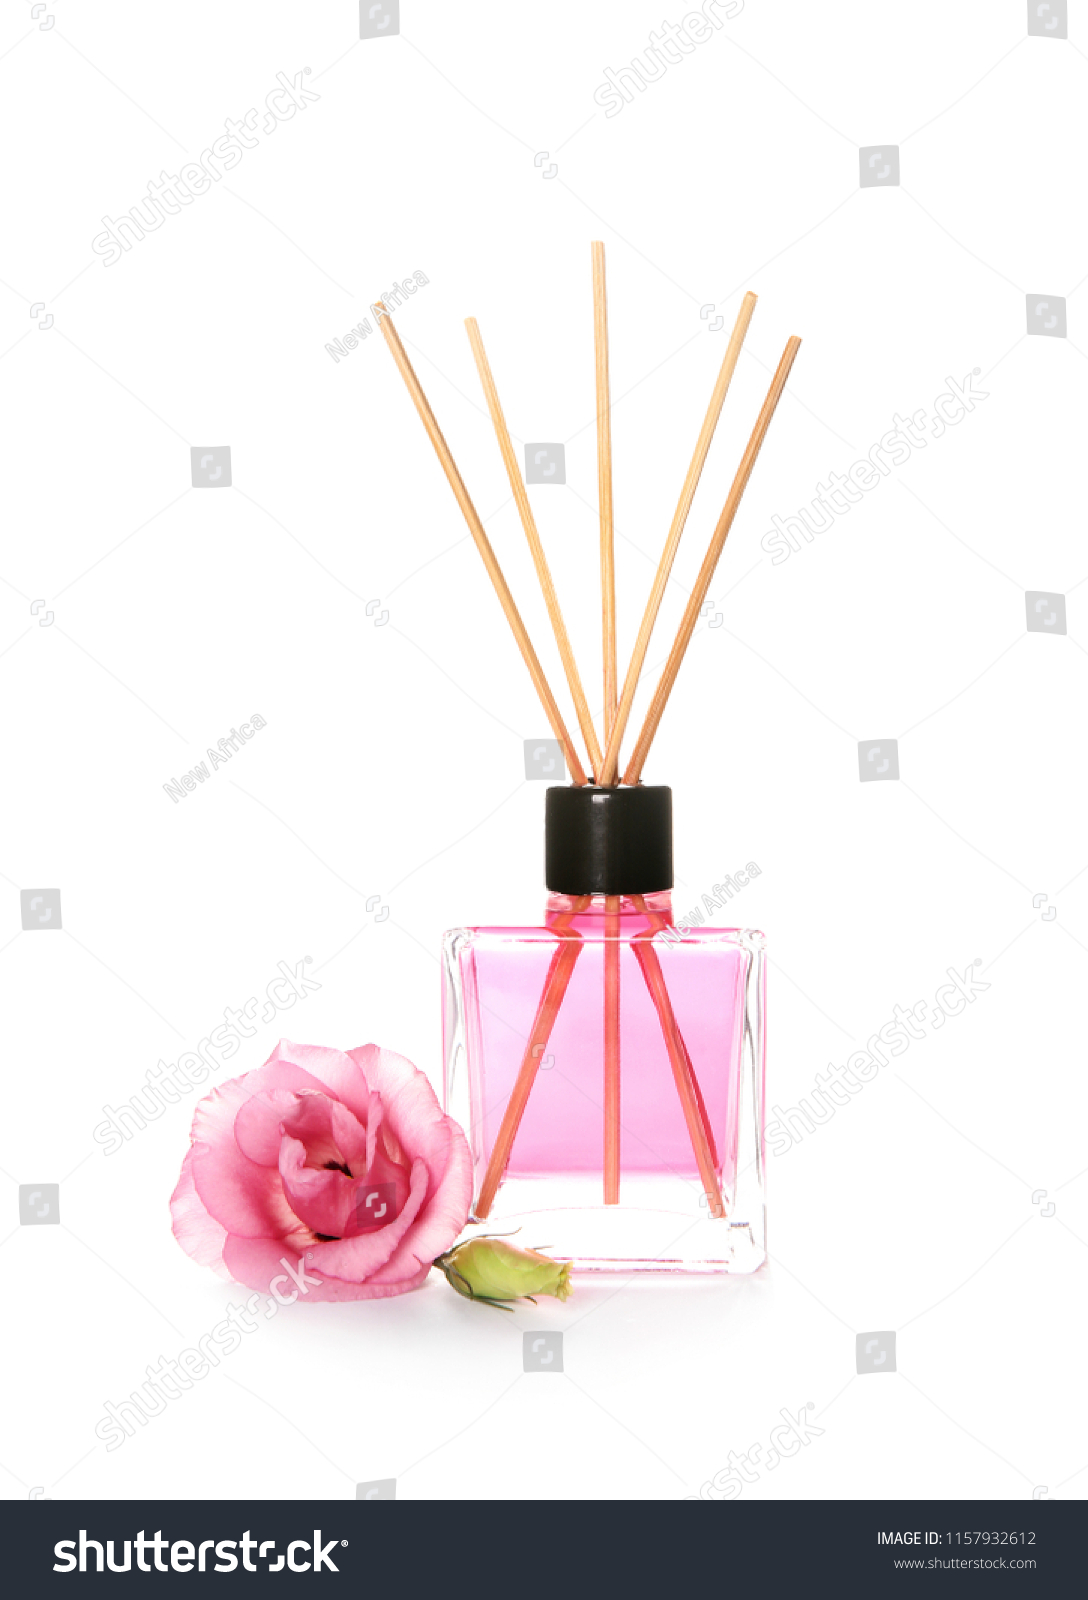 Aromatic reed air freshener and rose on white background #1157932612